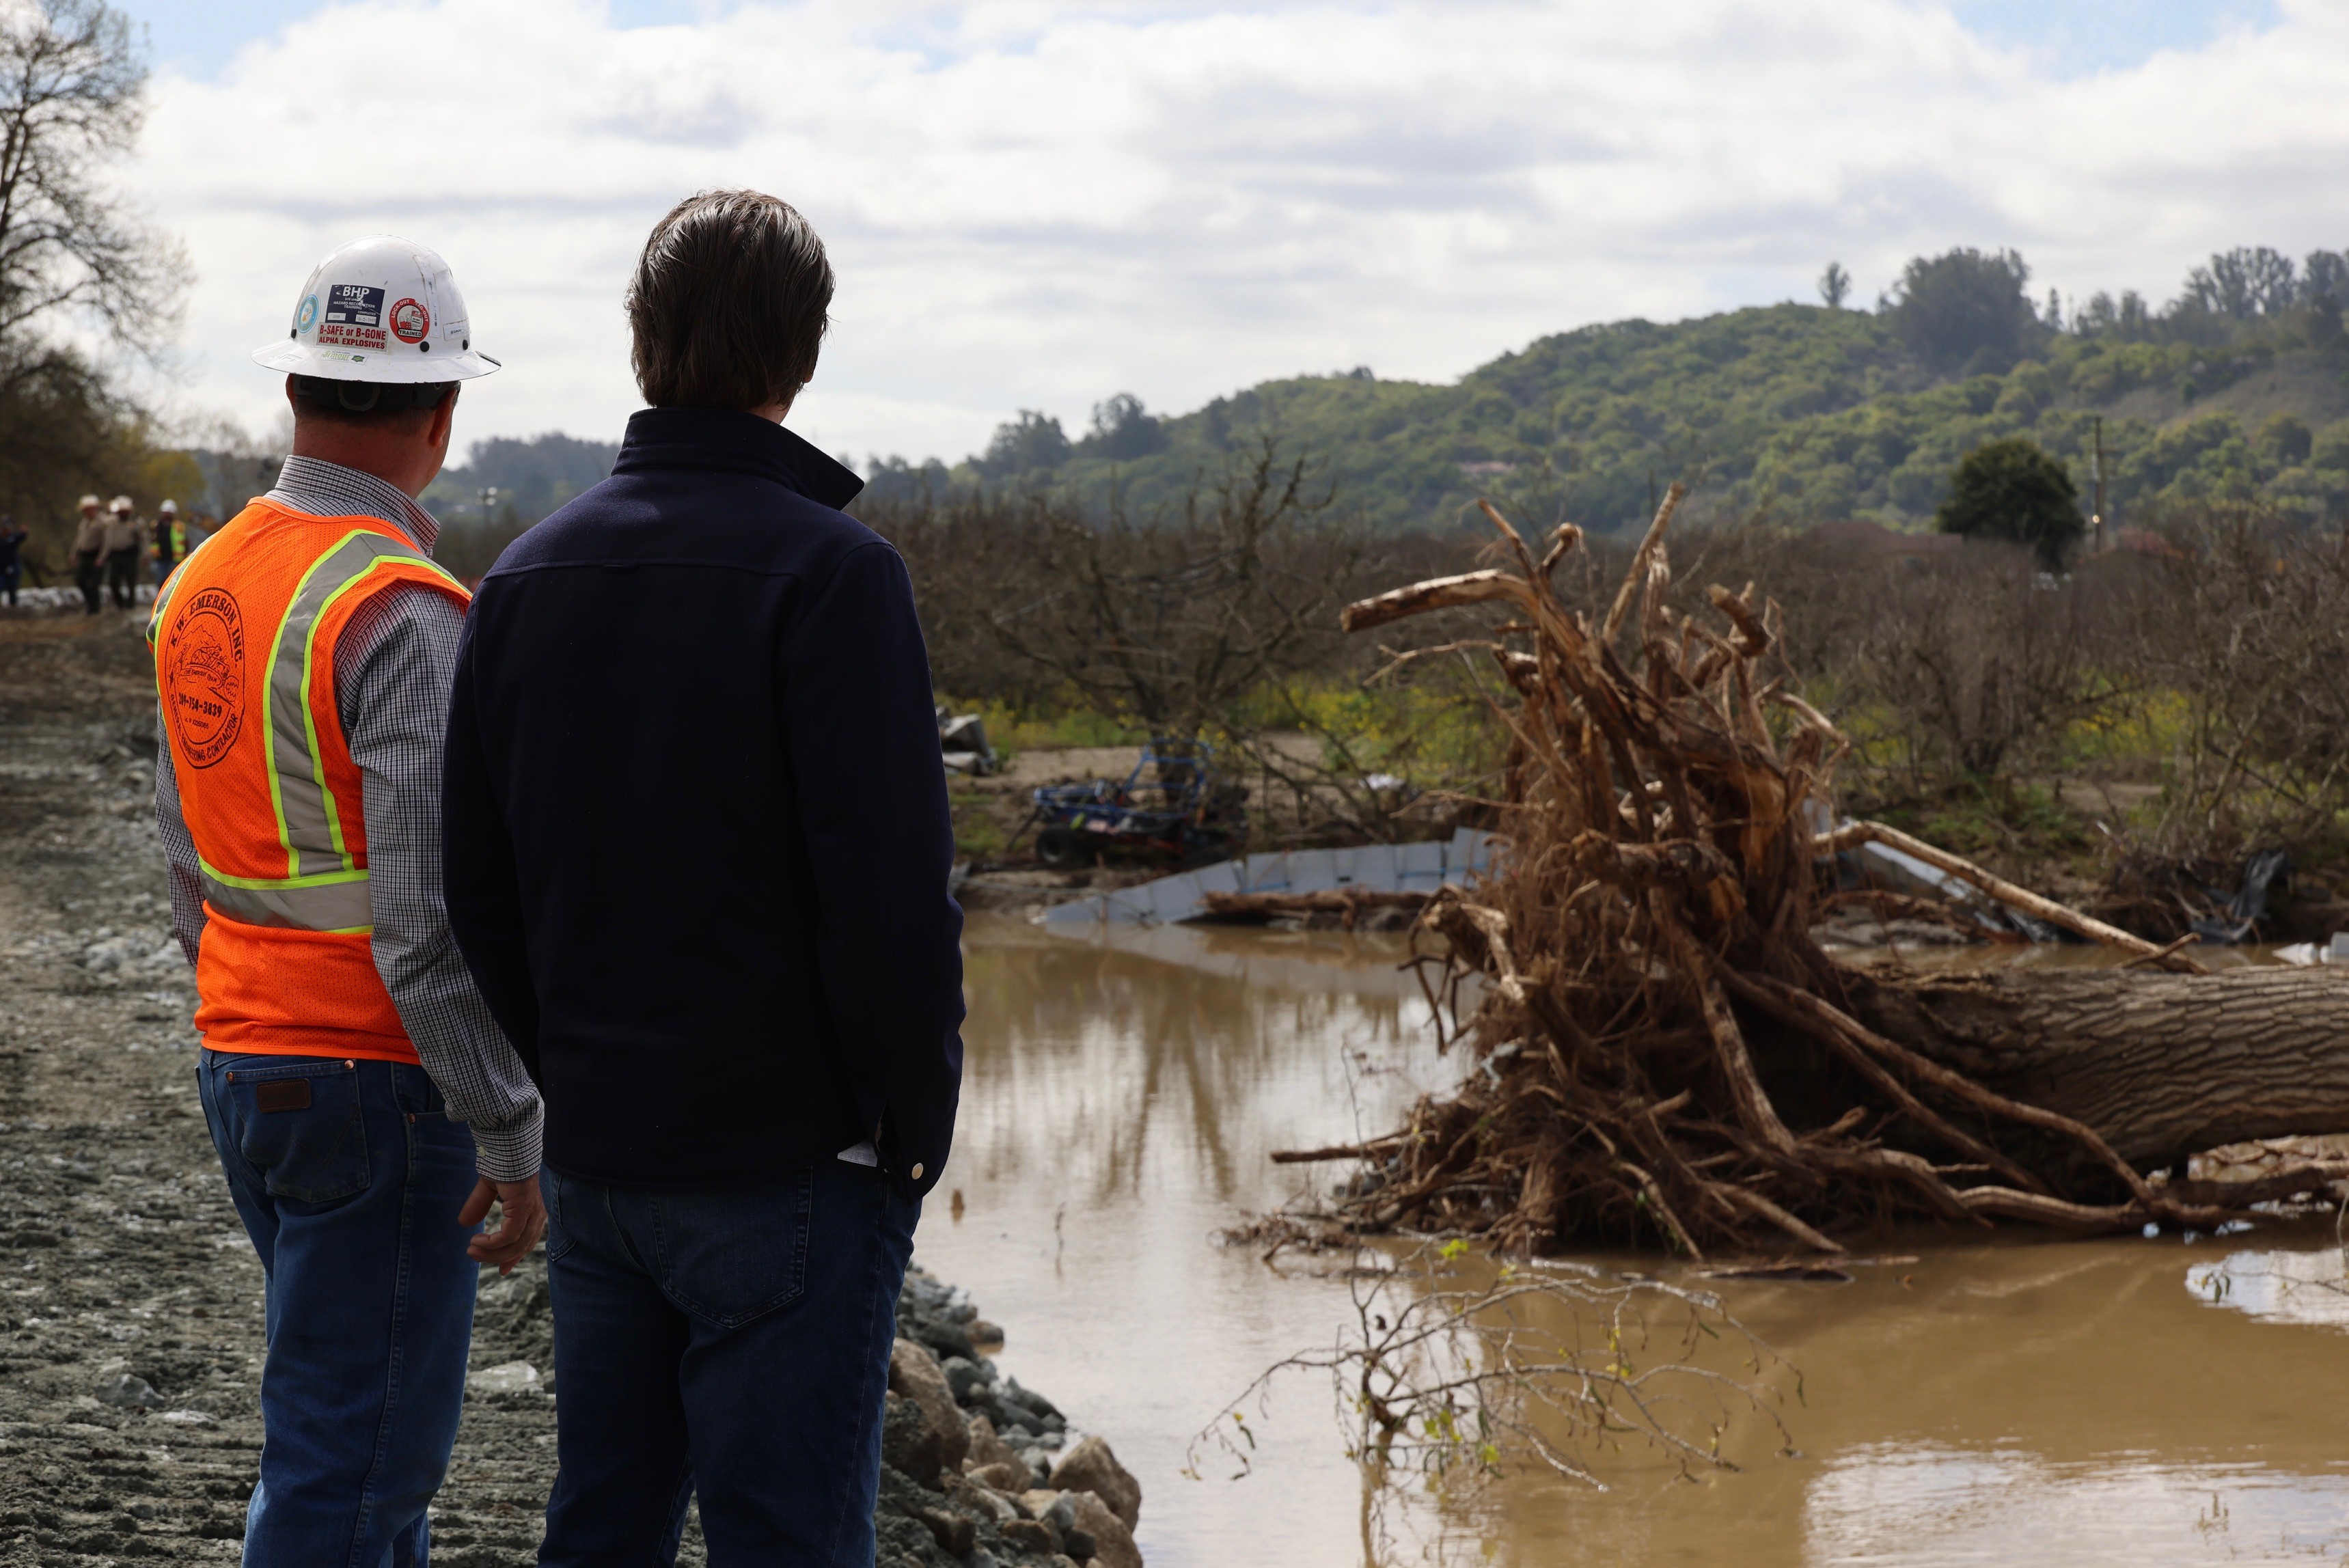 PHOTOS: In Pajaro, Governor Newsom Meets with First Responders and State and Local Leaders